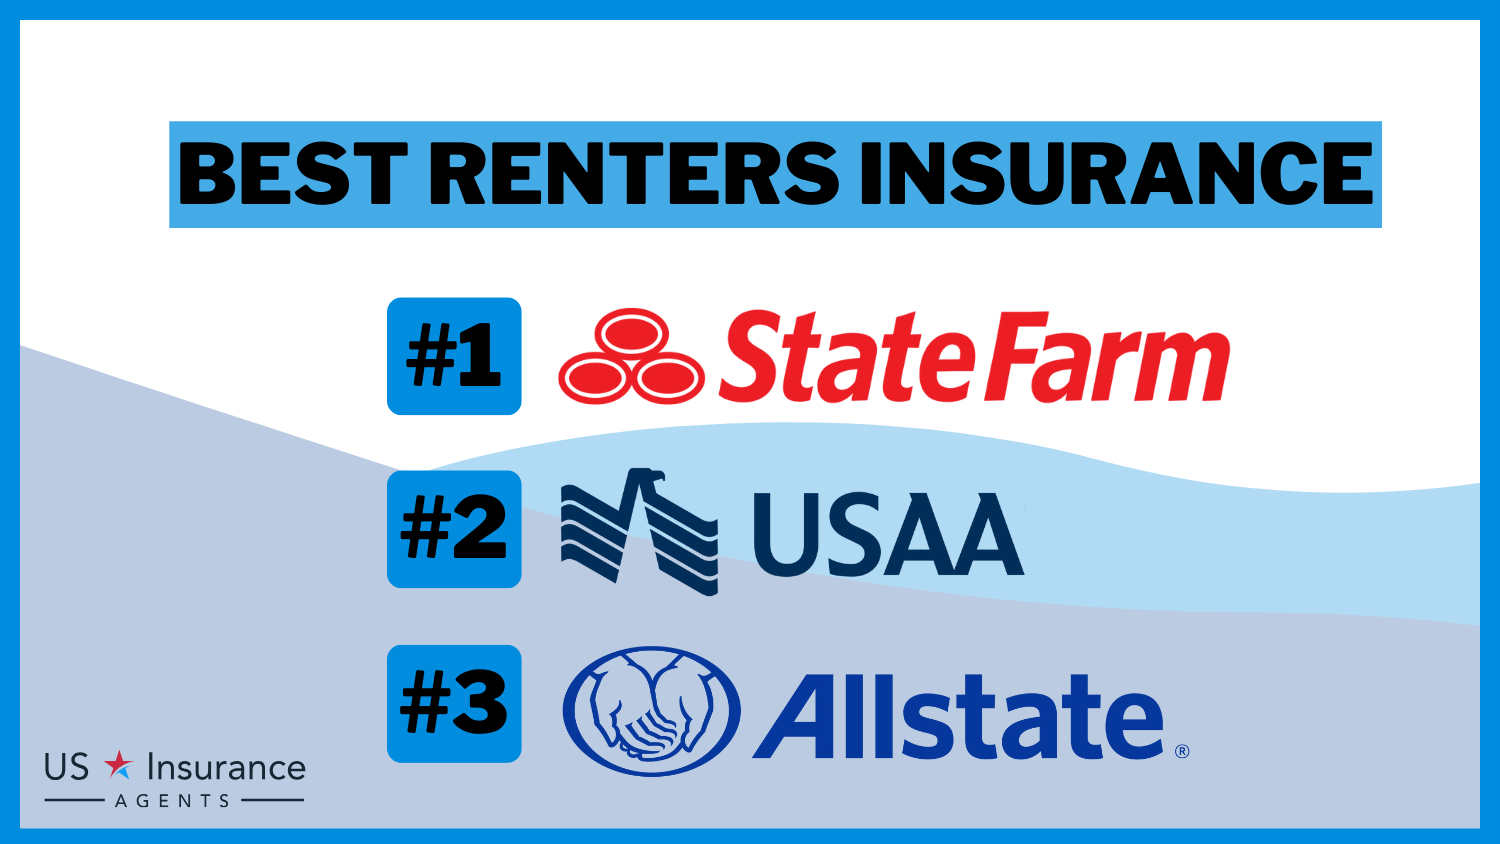 Best Renters Insurance: State Farm, USAA, and Allstate